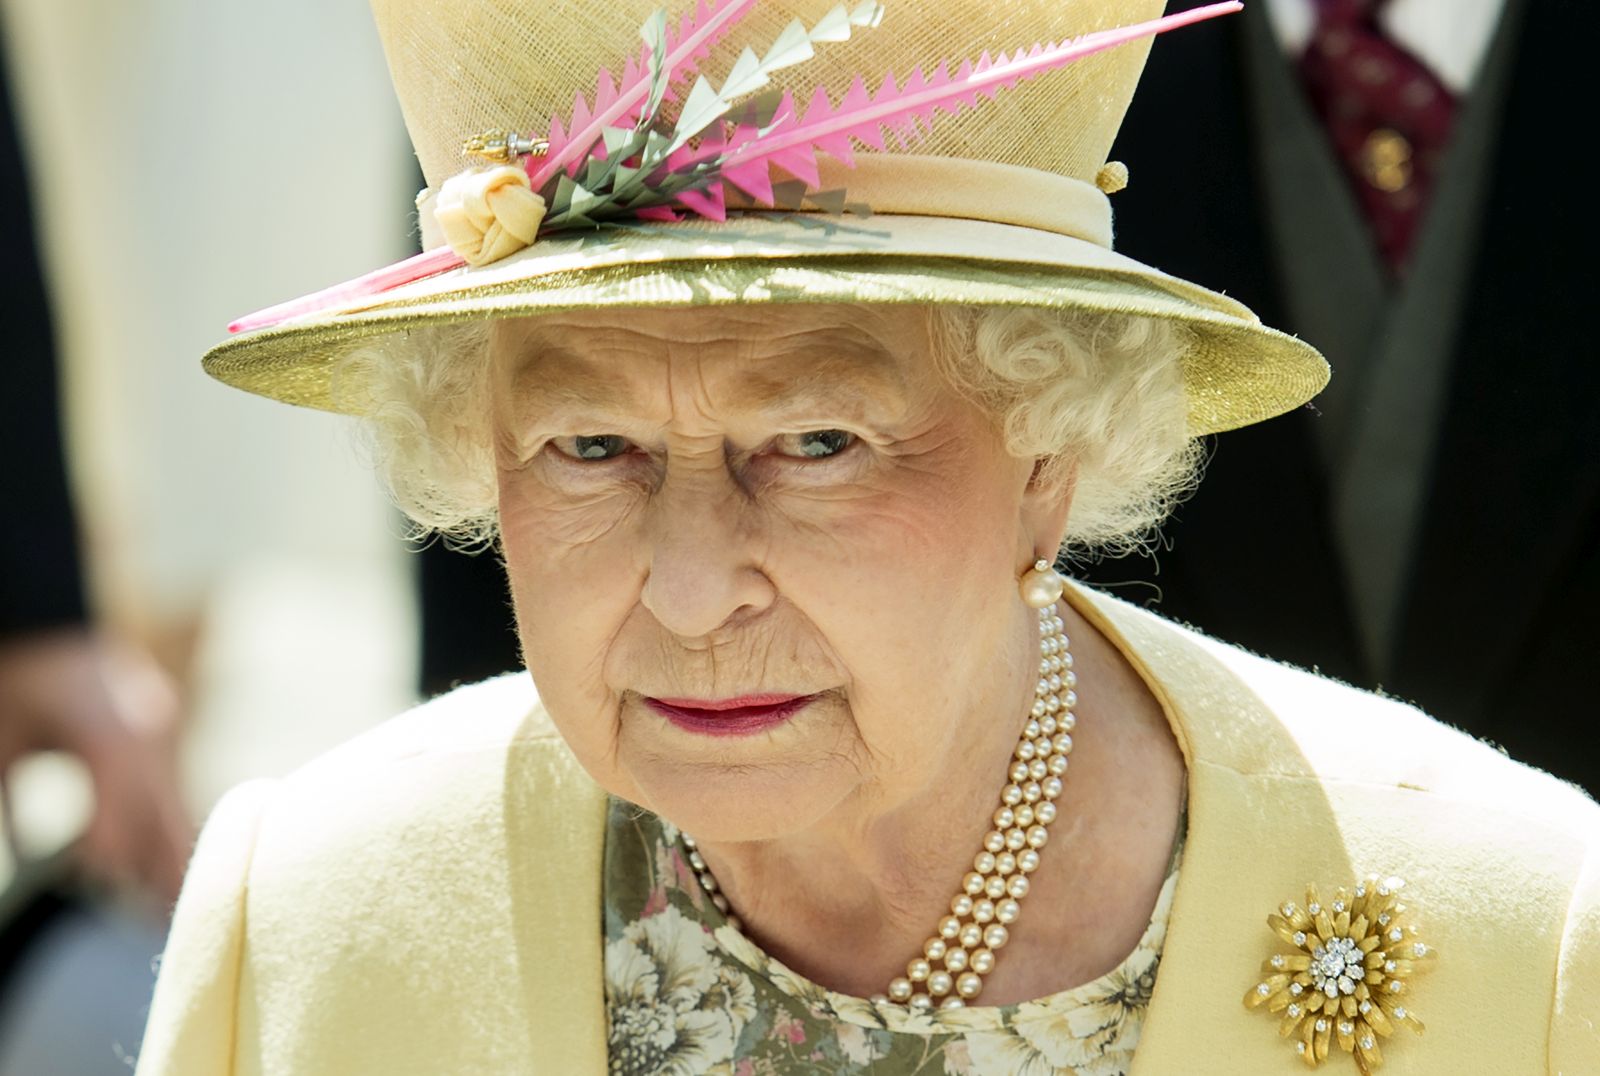 epa10170491 (FILE) - A picture dated 06 June 2015 shows Britain's Queen Elizabeth II arriving for the Derby Day at the Epsom Down Racecourse, in Epsom, outside London, Britain (reissued 08 September 2022). According to a statement issued by Buckingham Palace on 08 September 2022, Britain's Queen Elizabeth II has died at her Scottish estate, Balmoral Castle, on 08 September 2022. The 96-year-old Queen was the longest-reigning monarch in British history.  EPA/FACUNDO ARRIZABALAGA